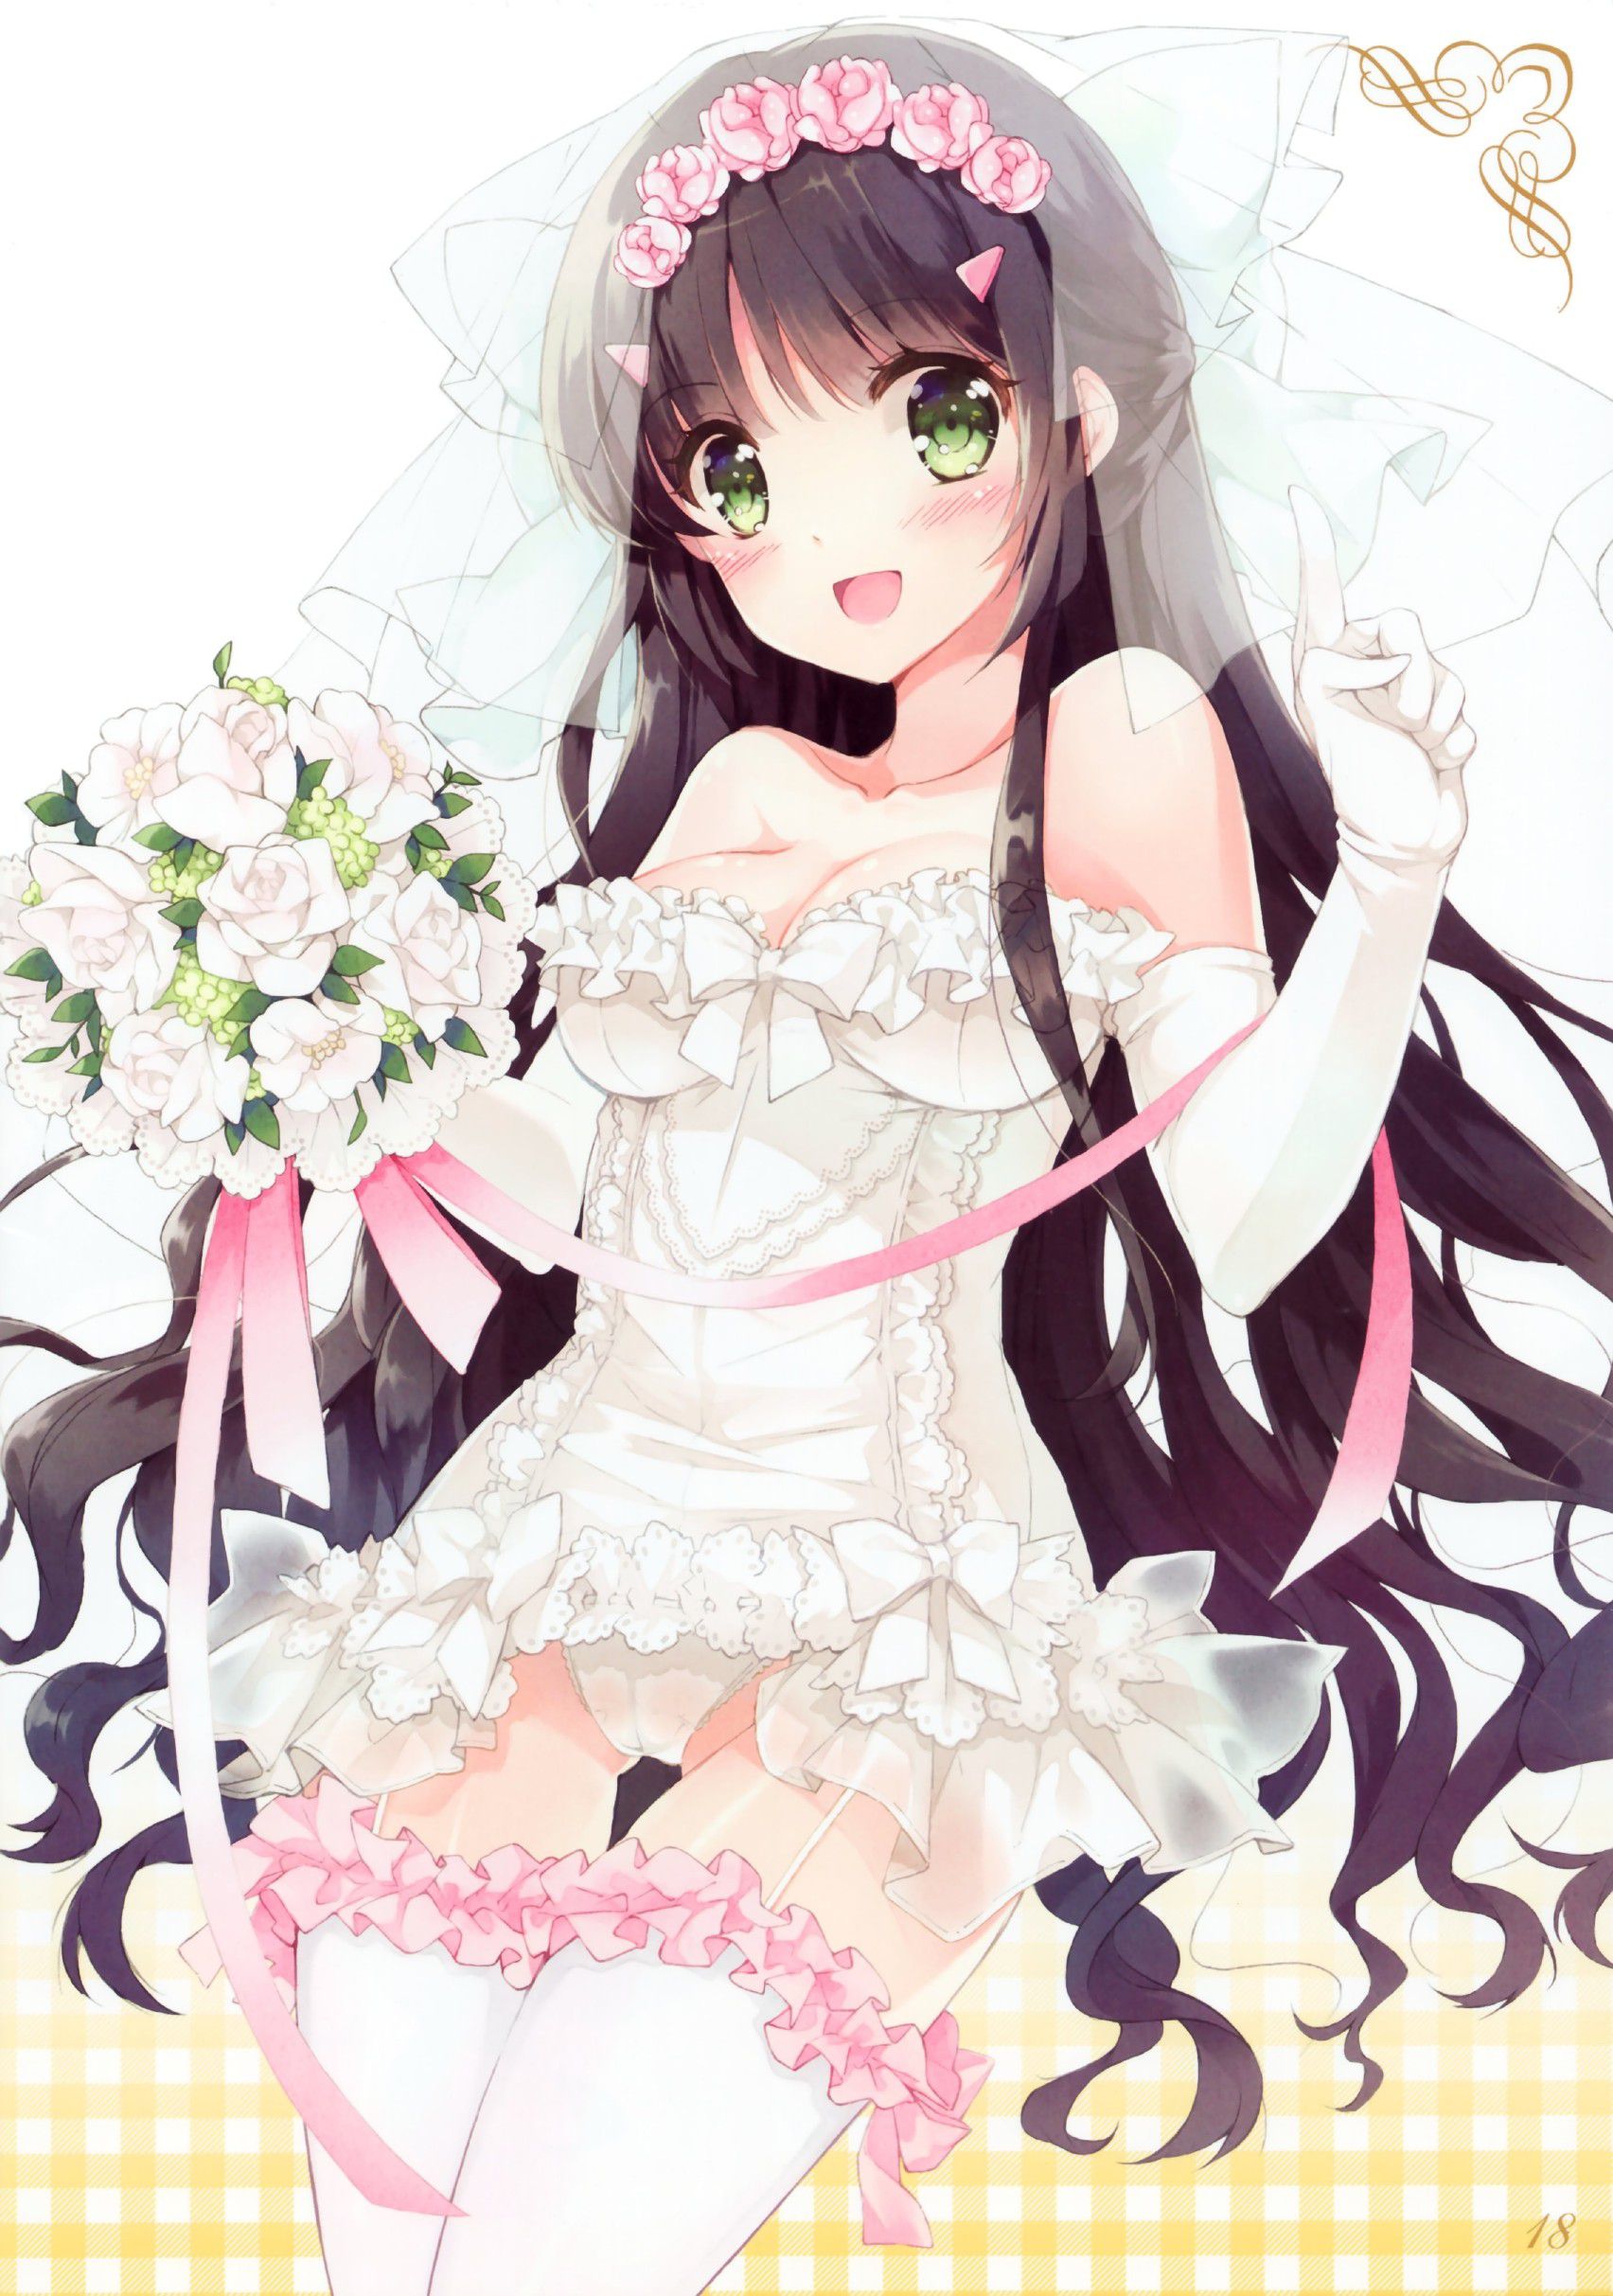 [2nd] Second erotic image of the girl in the wedding dress 15 [wedding dress] 25